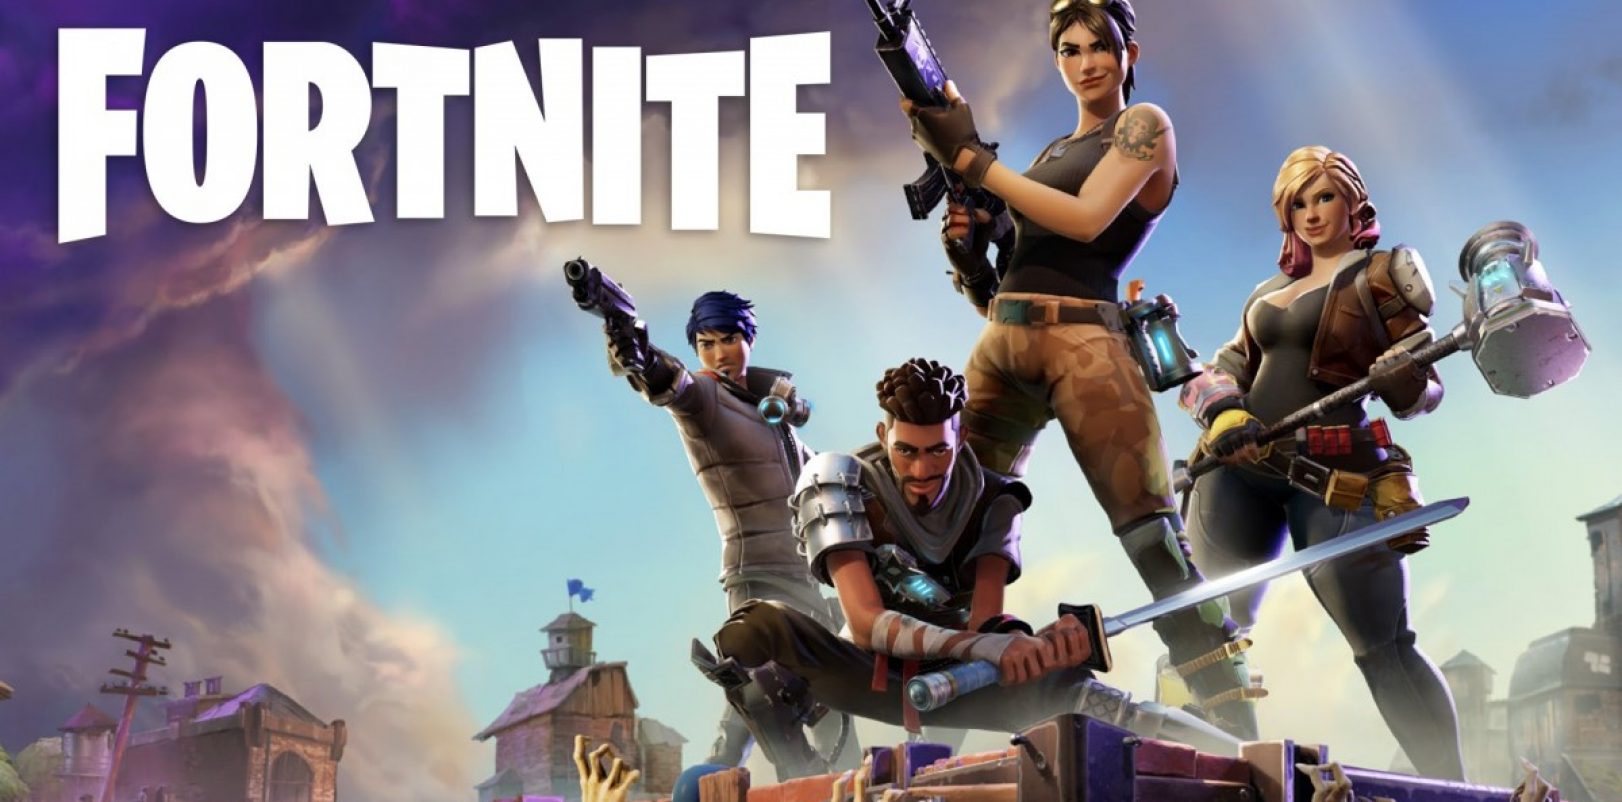 How To Unblock Fortnite At School Best 10 Vpn Reviews